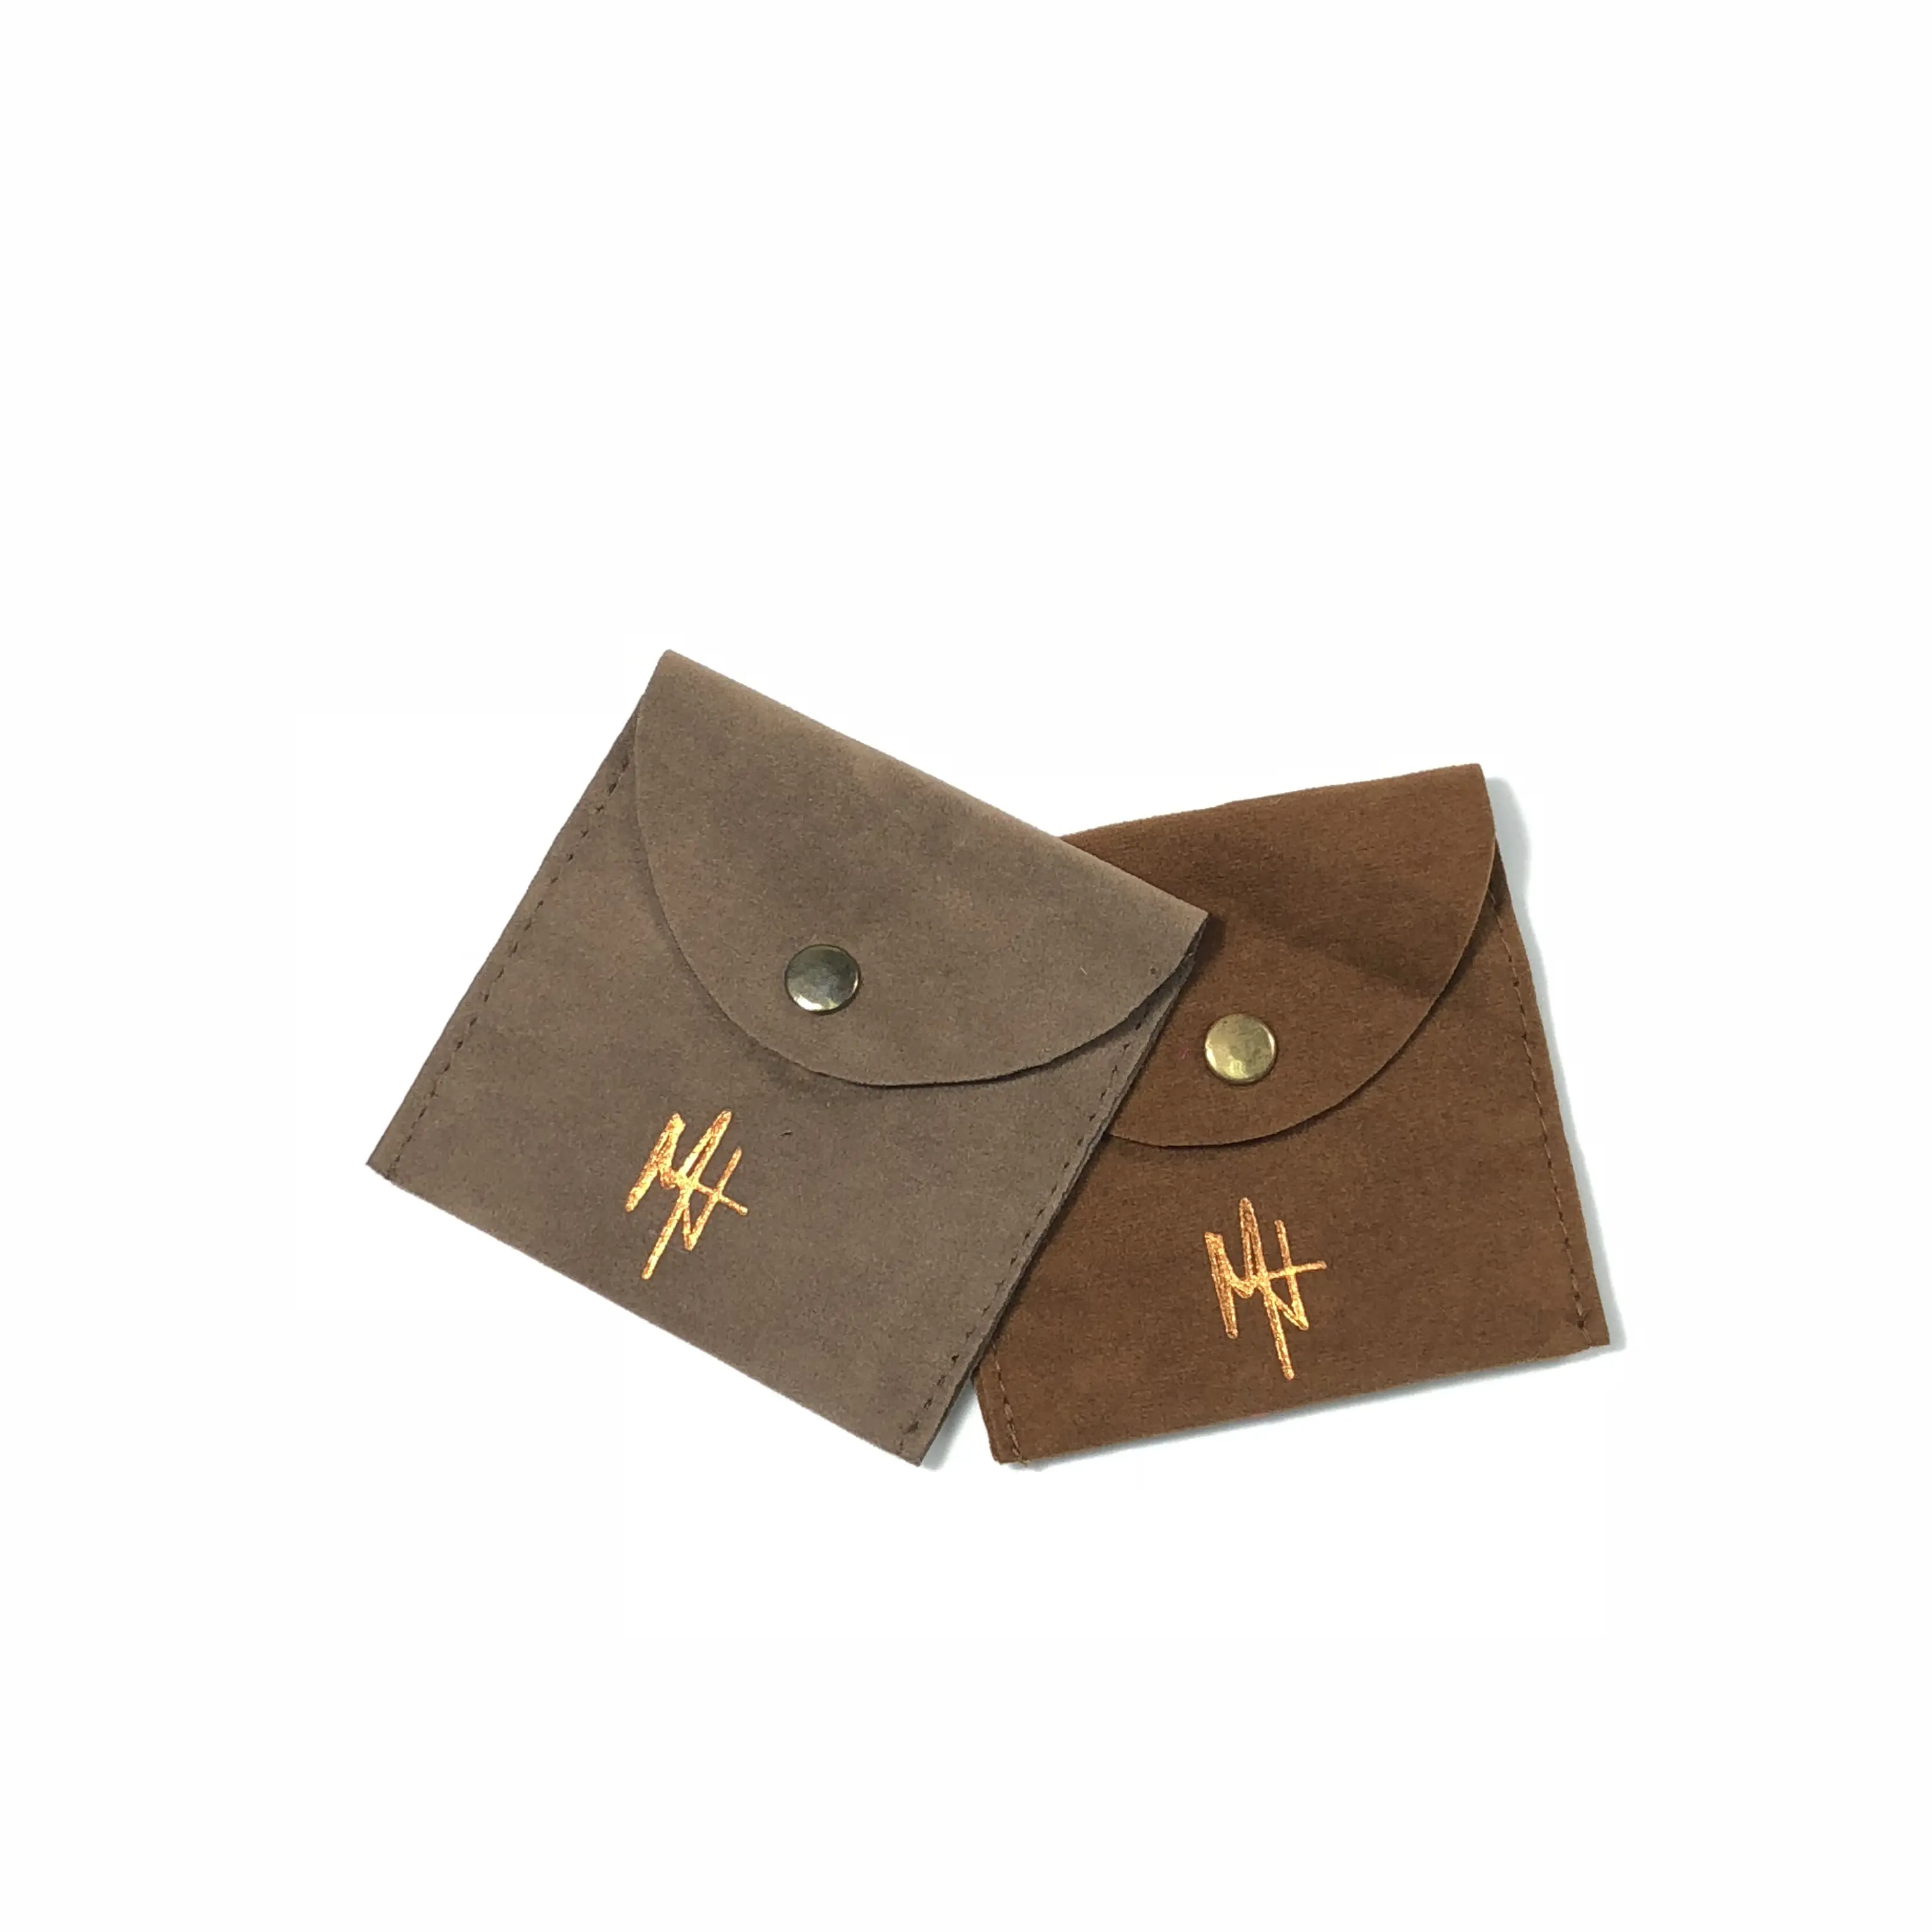 Brown Suede Velvet Square Flap Pouch With Pockets Inside Gold Foild Velvet Jewelry Pouch Bags Pouch With Snap Closure Custom